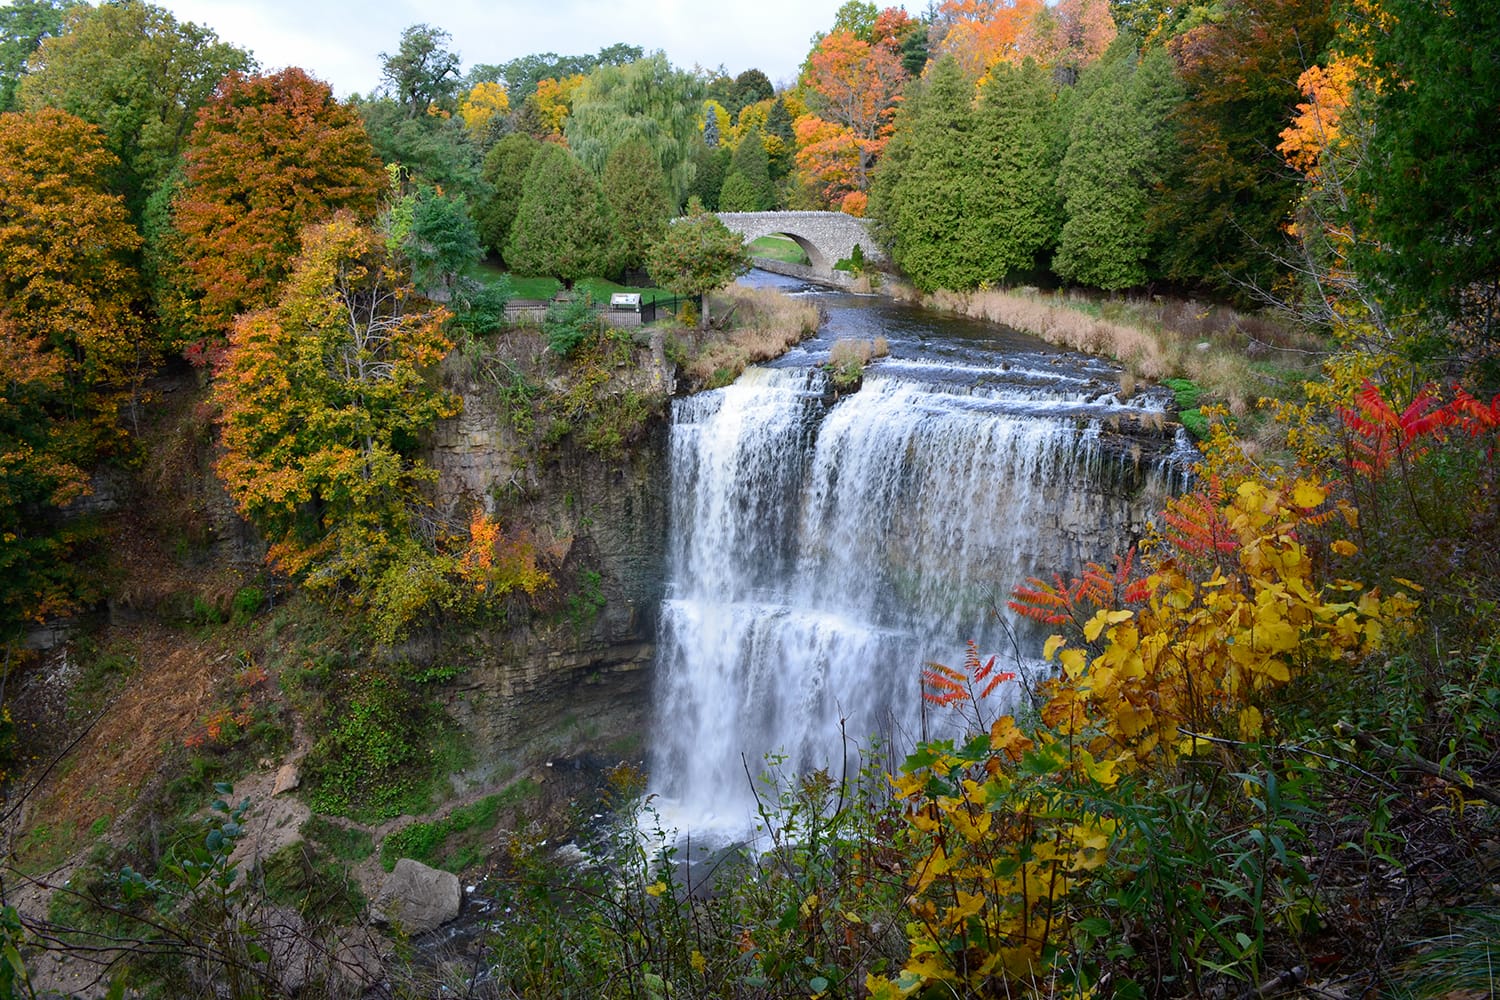 The Webster's Falls view along Spencer Gorge hiking trail in Hamilton, Ontario, Canada. Autumn Season.